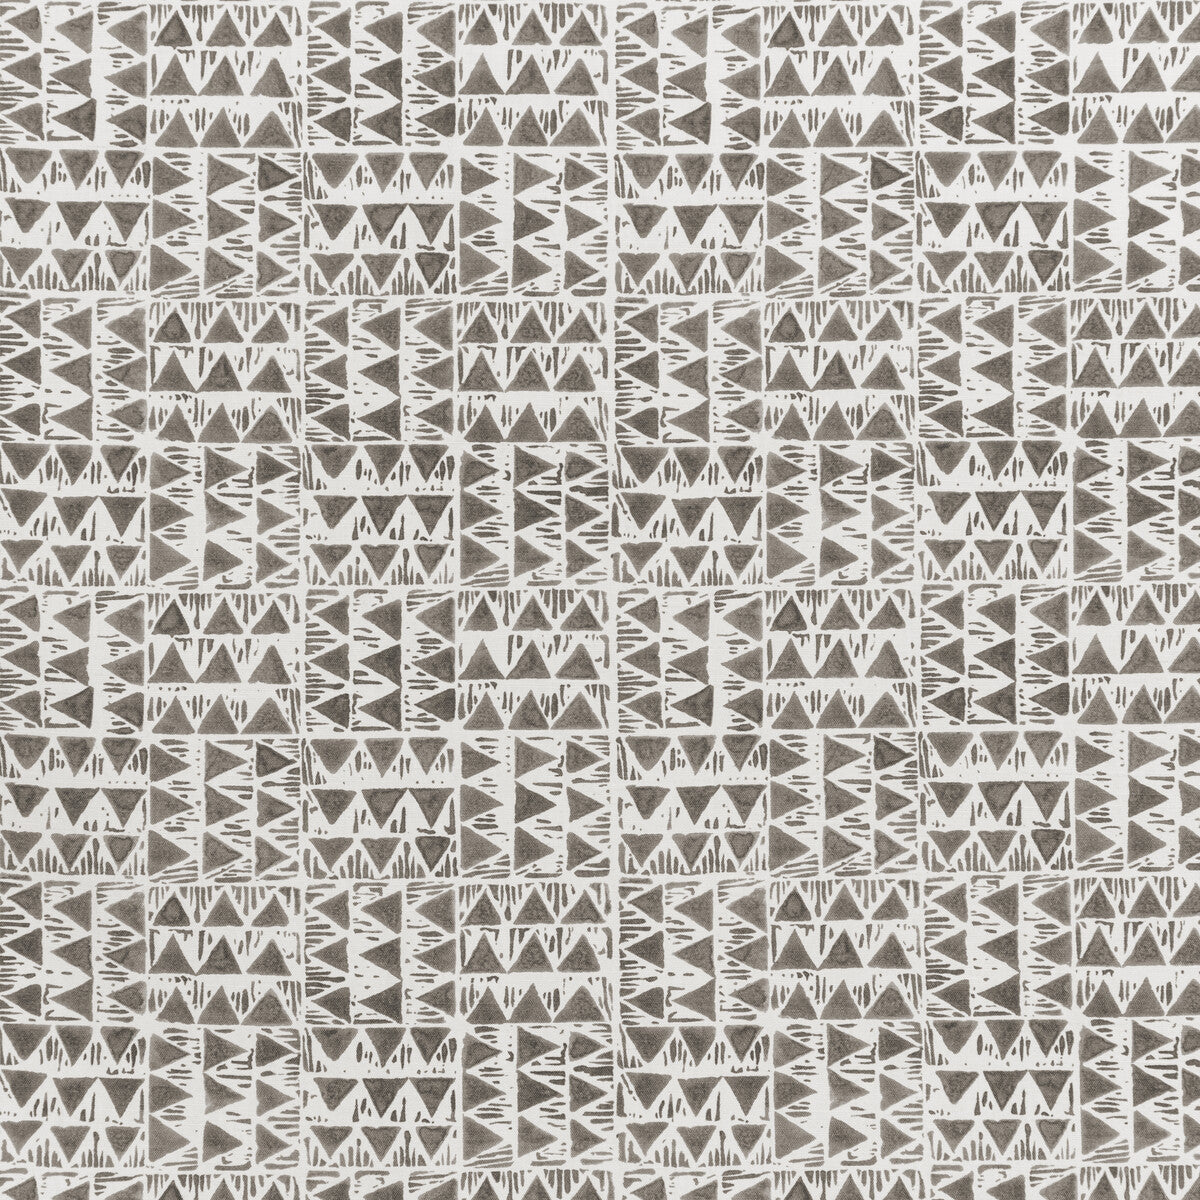 Yampa Print fabric in grey color - pattern 2020210.11.0 - by Lee Jofa in the Breckenridge collection